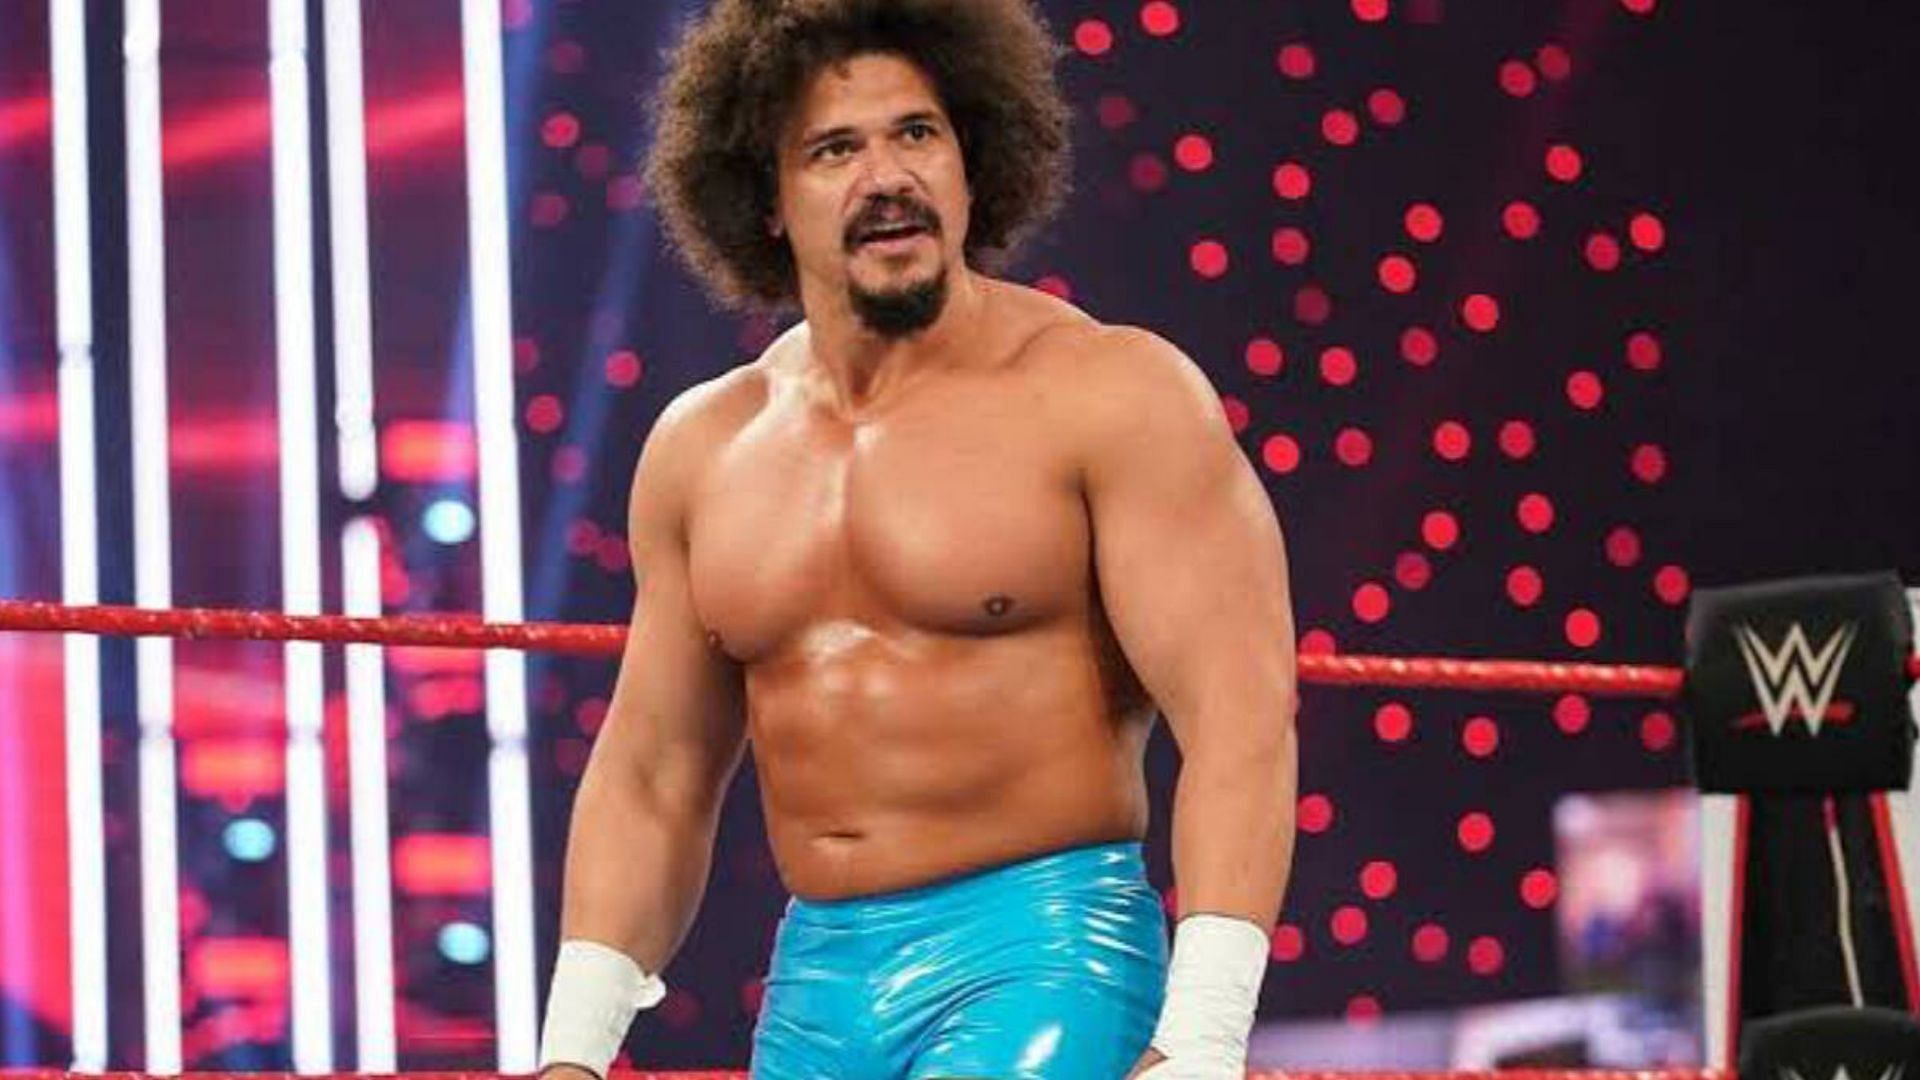 Carlito is a former WWE Intercontinental Champion.